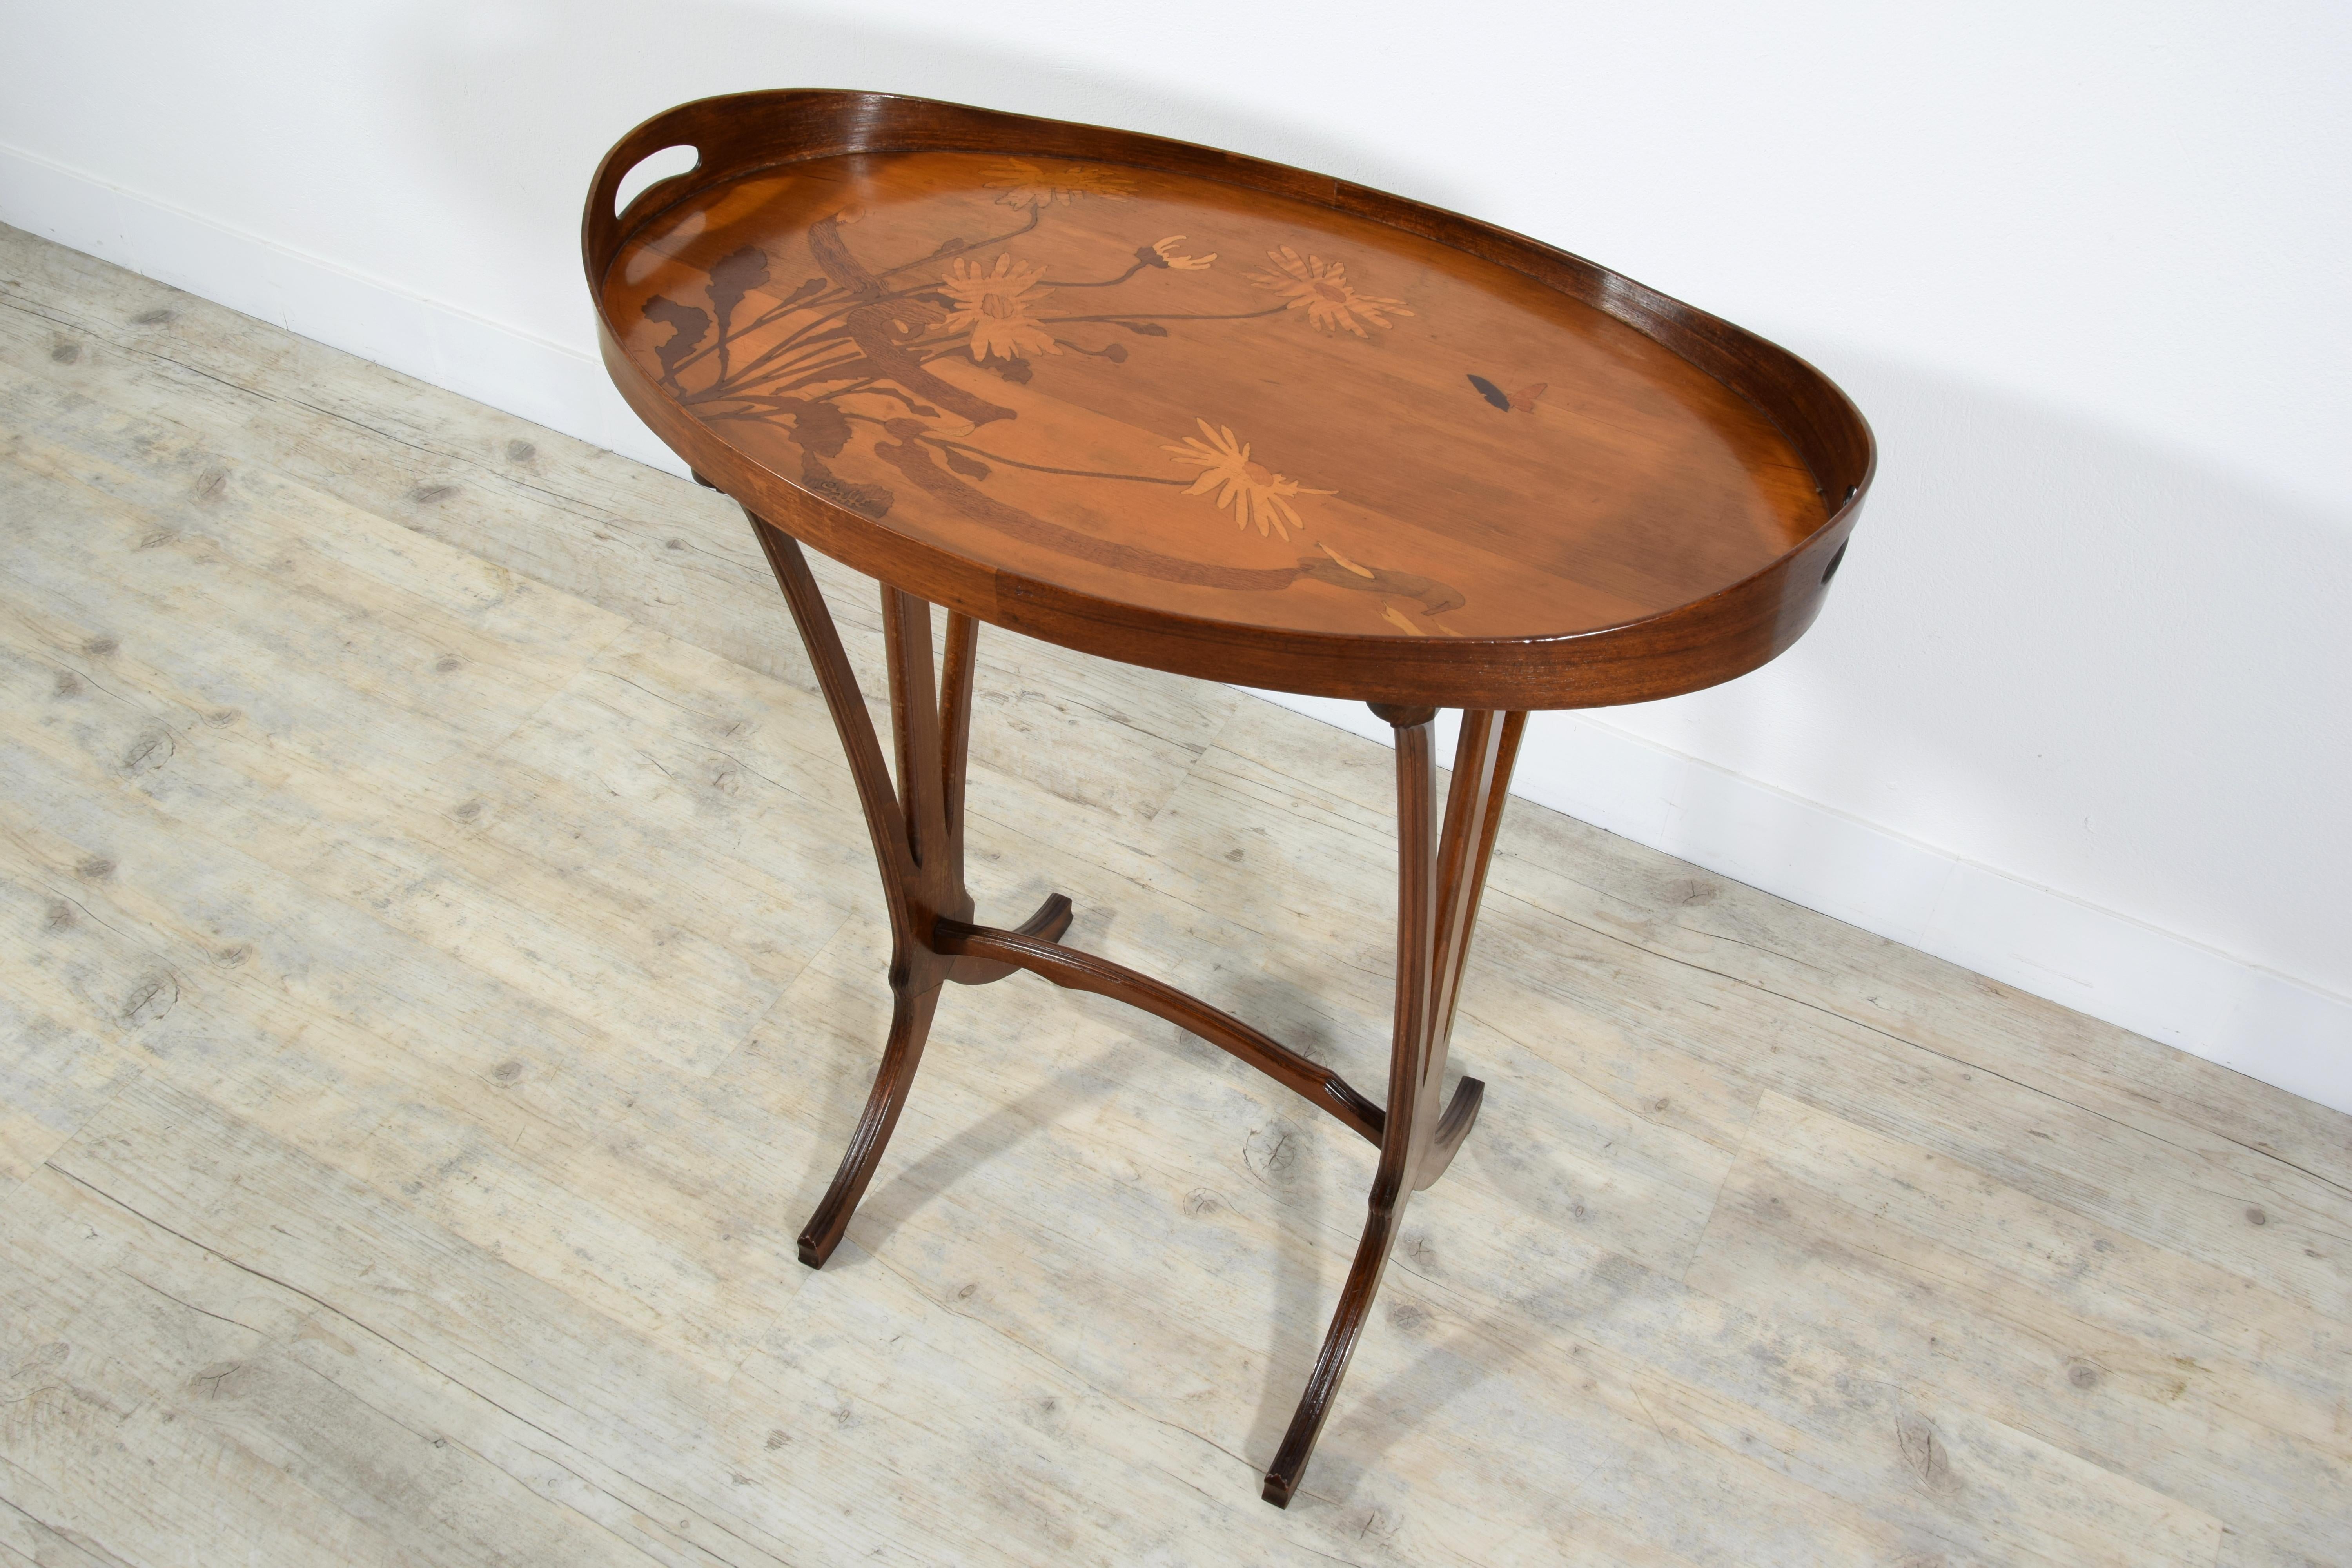 French Inlay Wood Coffee Table by Emile Gallé (1846-1904) For Sale 14